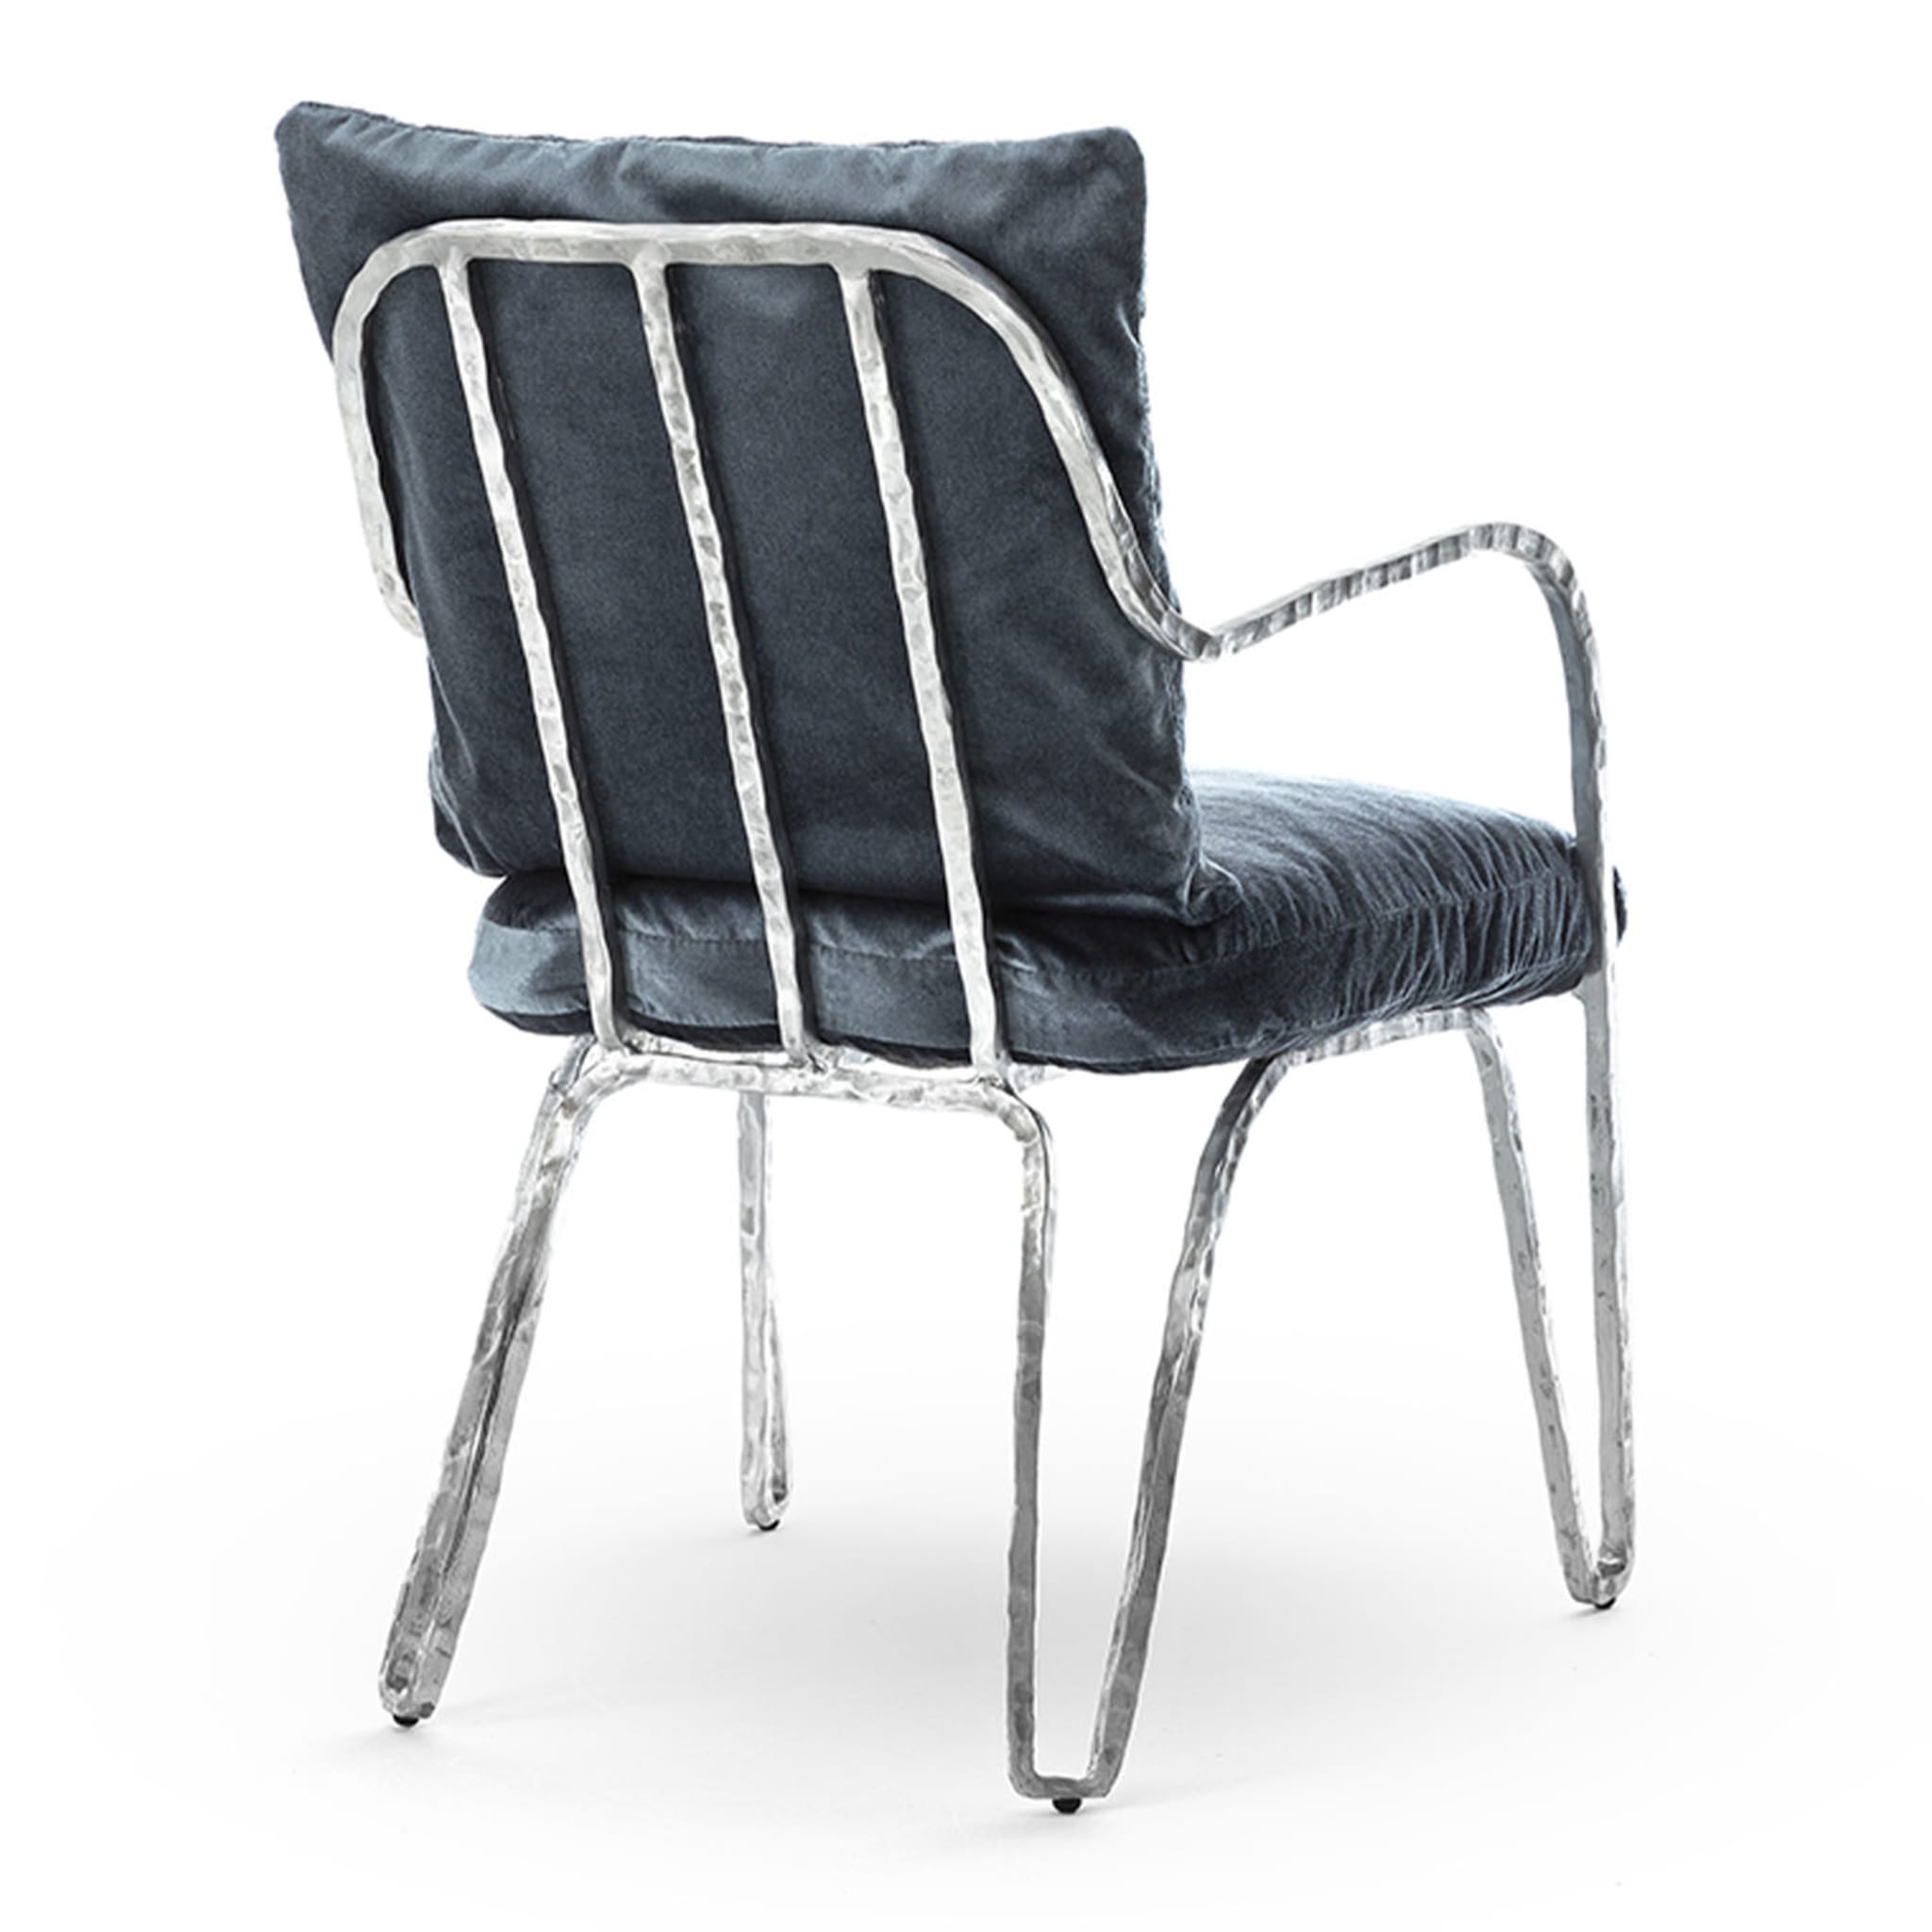 Moonlight Silver and Blue Low Chair - Alternative view 4